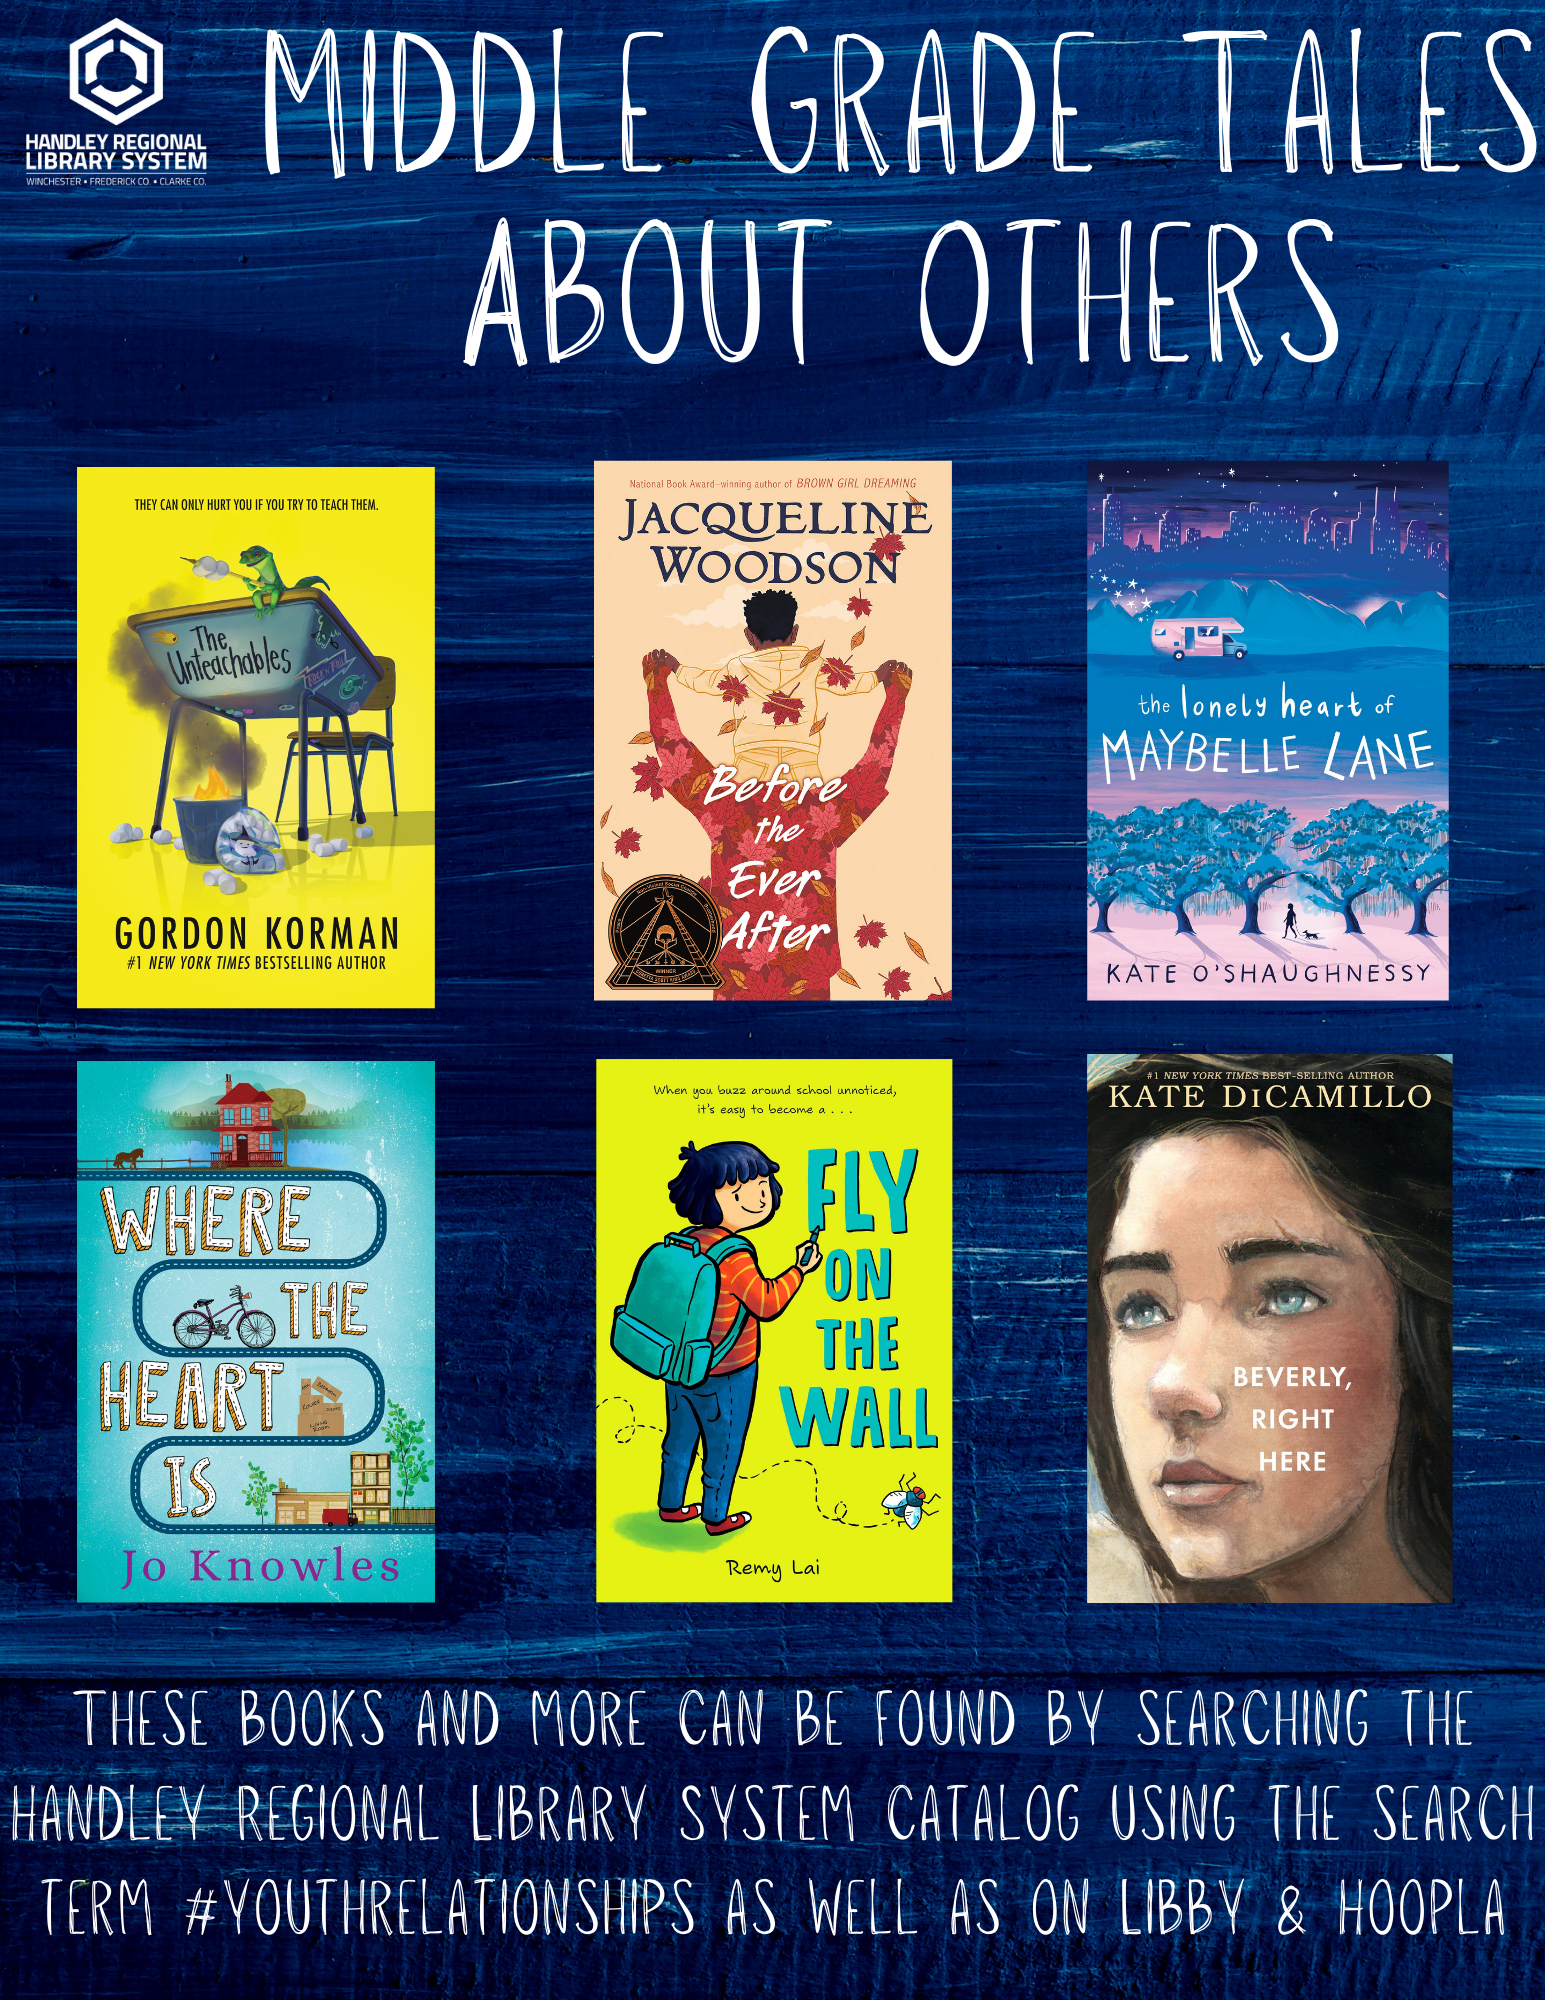 Middle Grade Tales About Others Book Covers